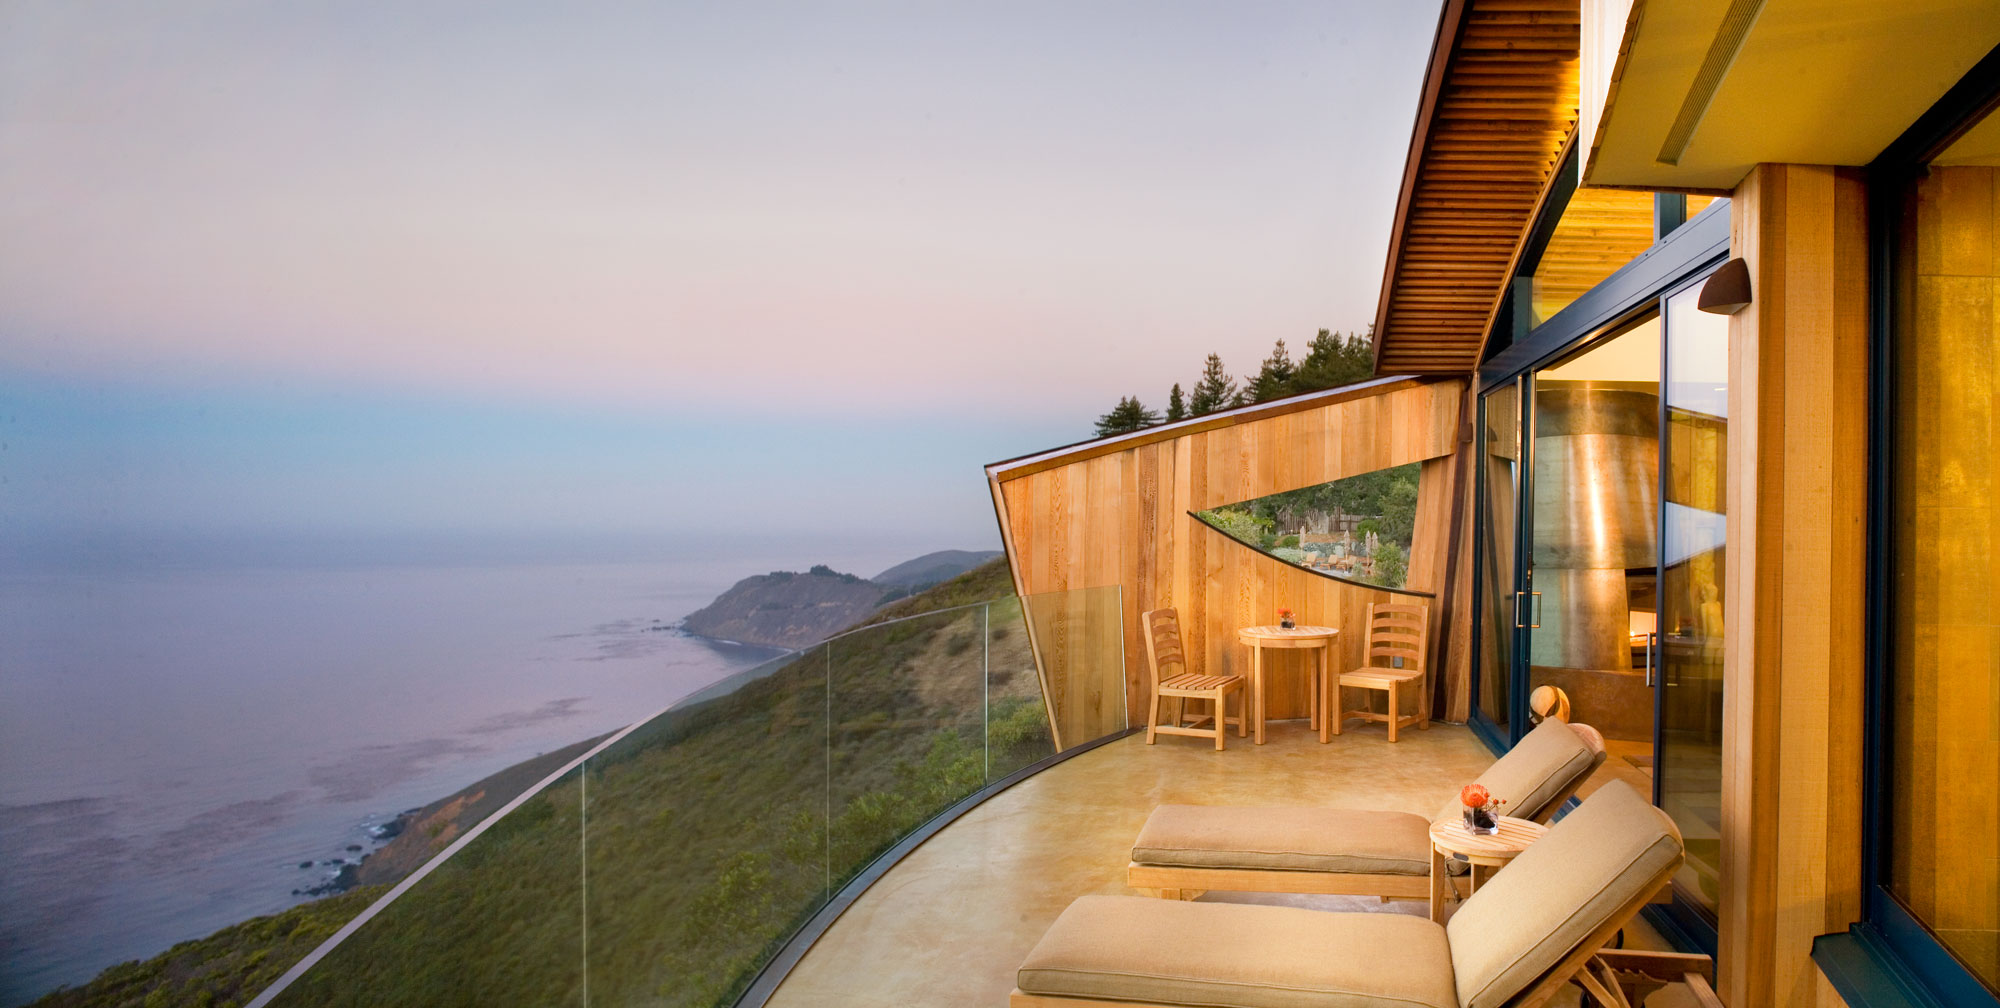 Get as close to paradise as possible with a braincation at the Post Ranch Inn in Big Sur